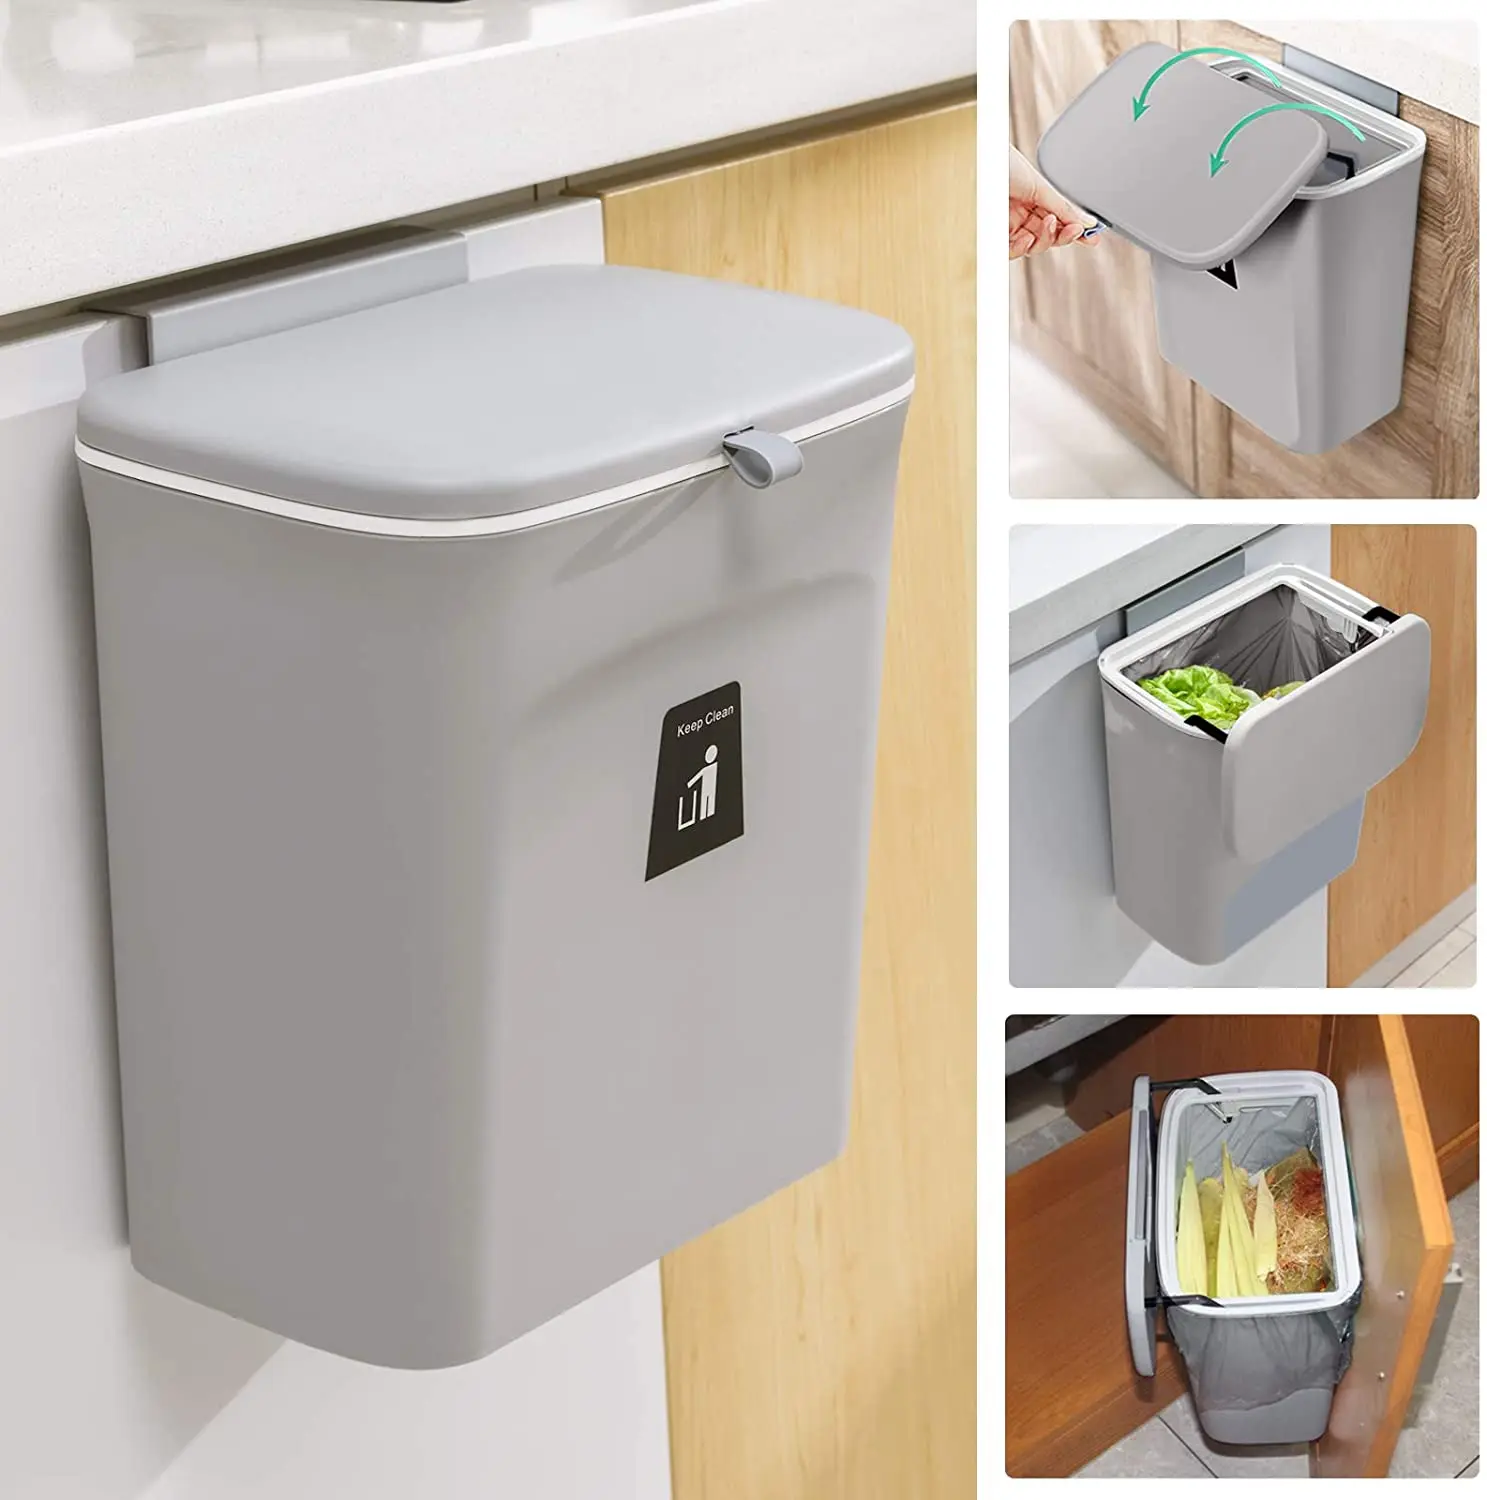 Kitchen compost bins for your countertop